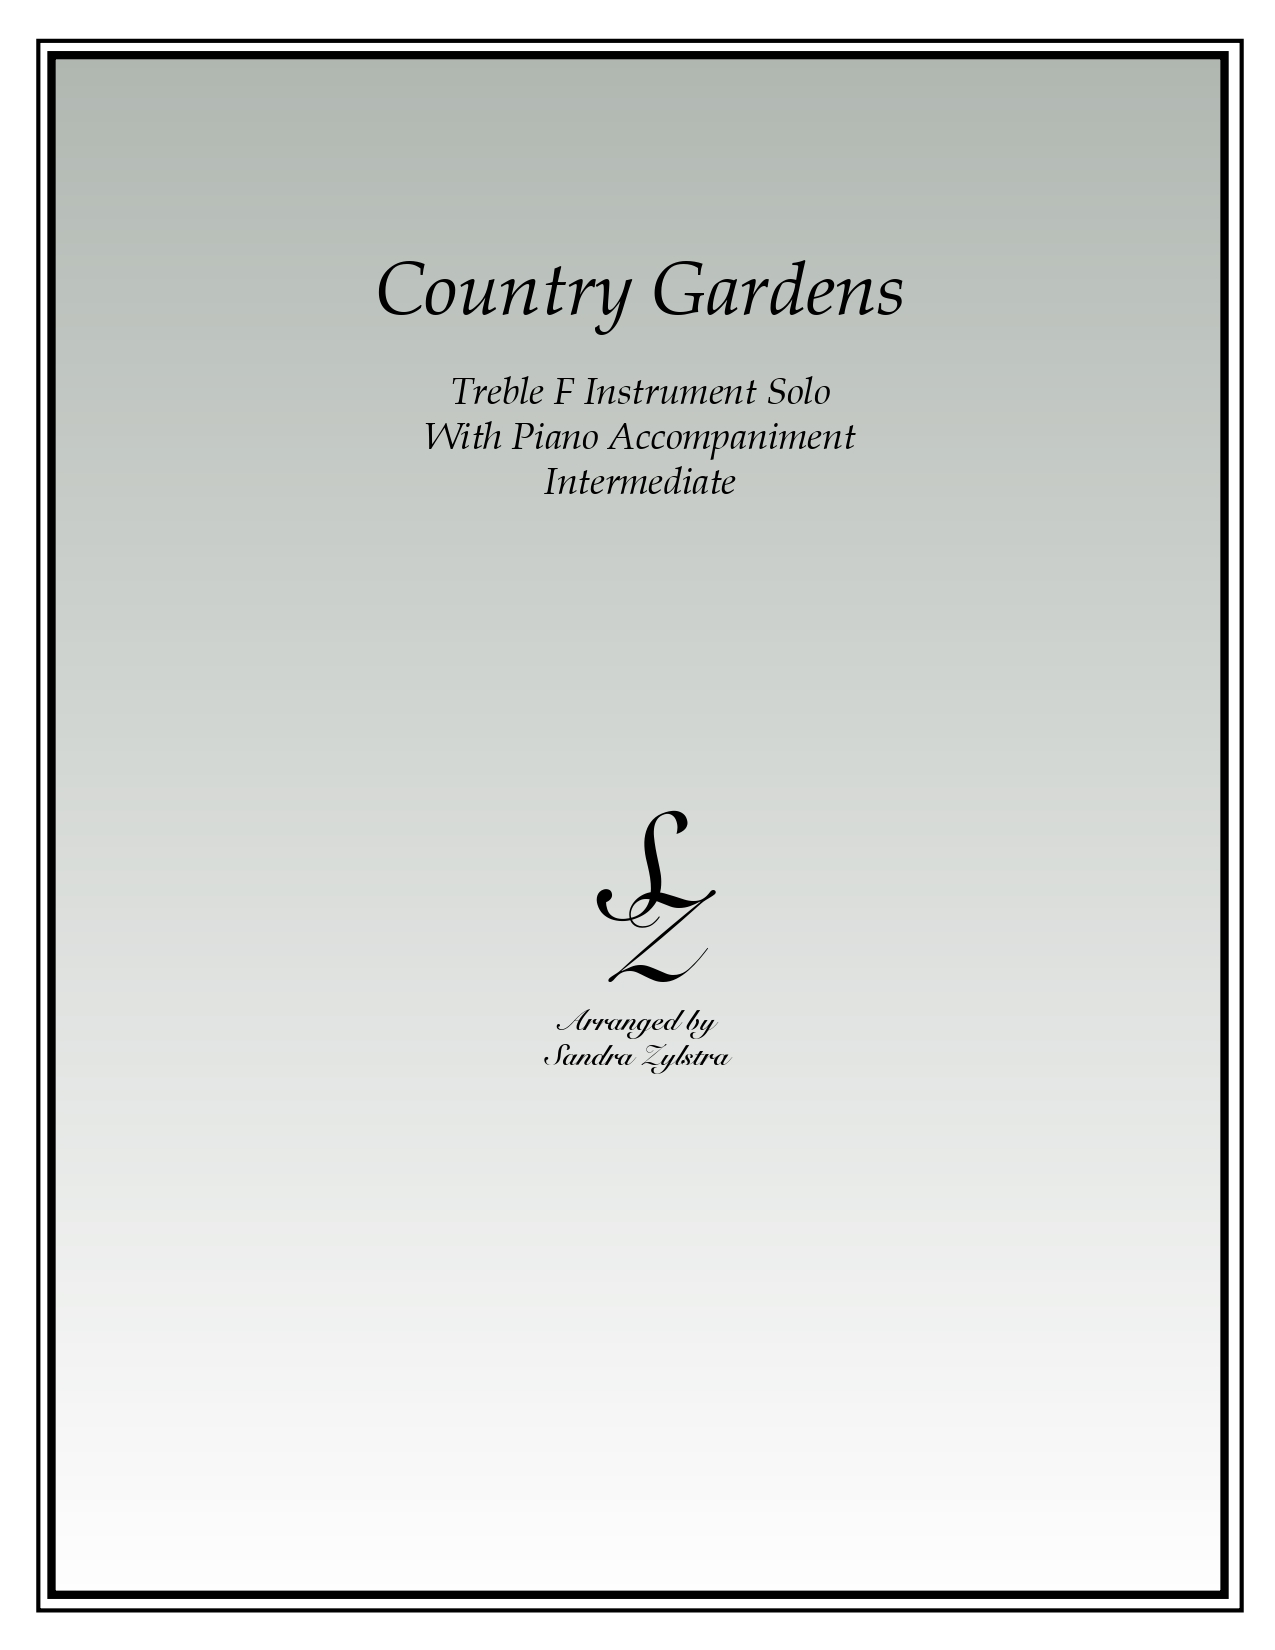 Country Gardens F instrument solo part cover page 00011